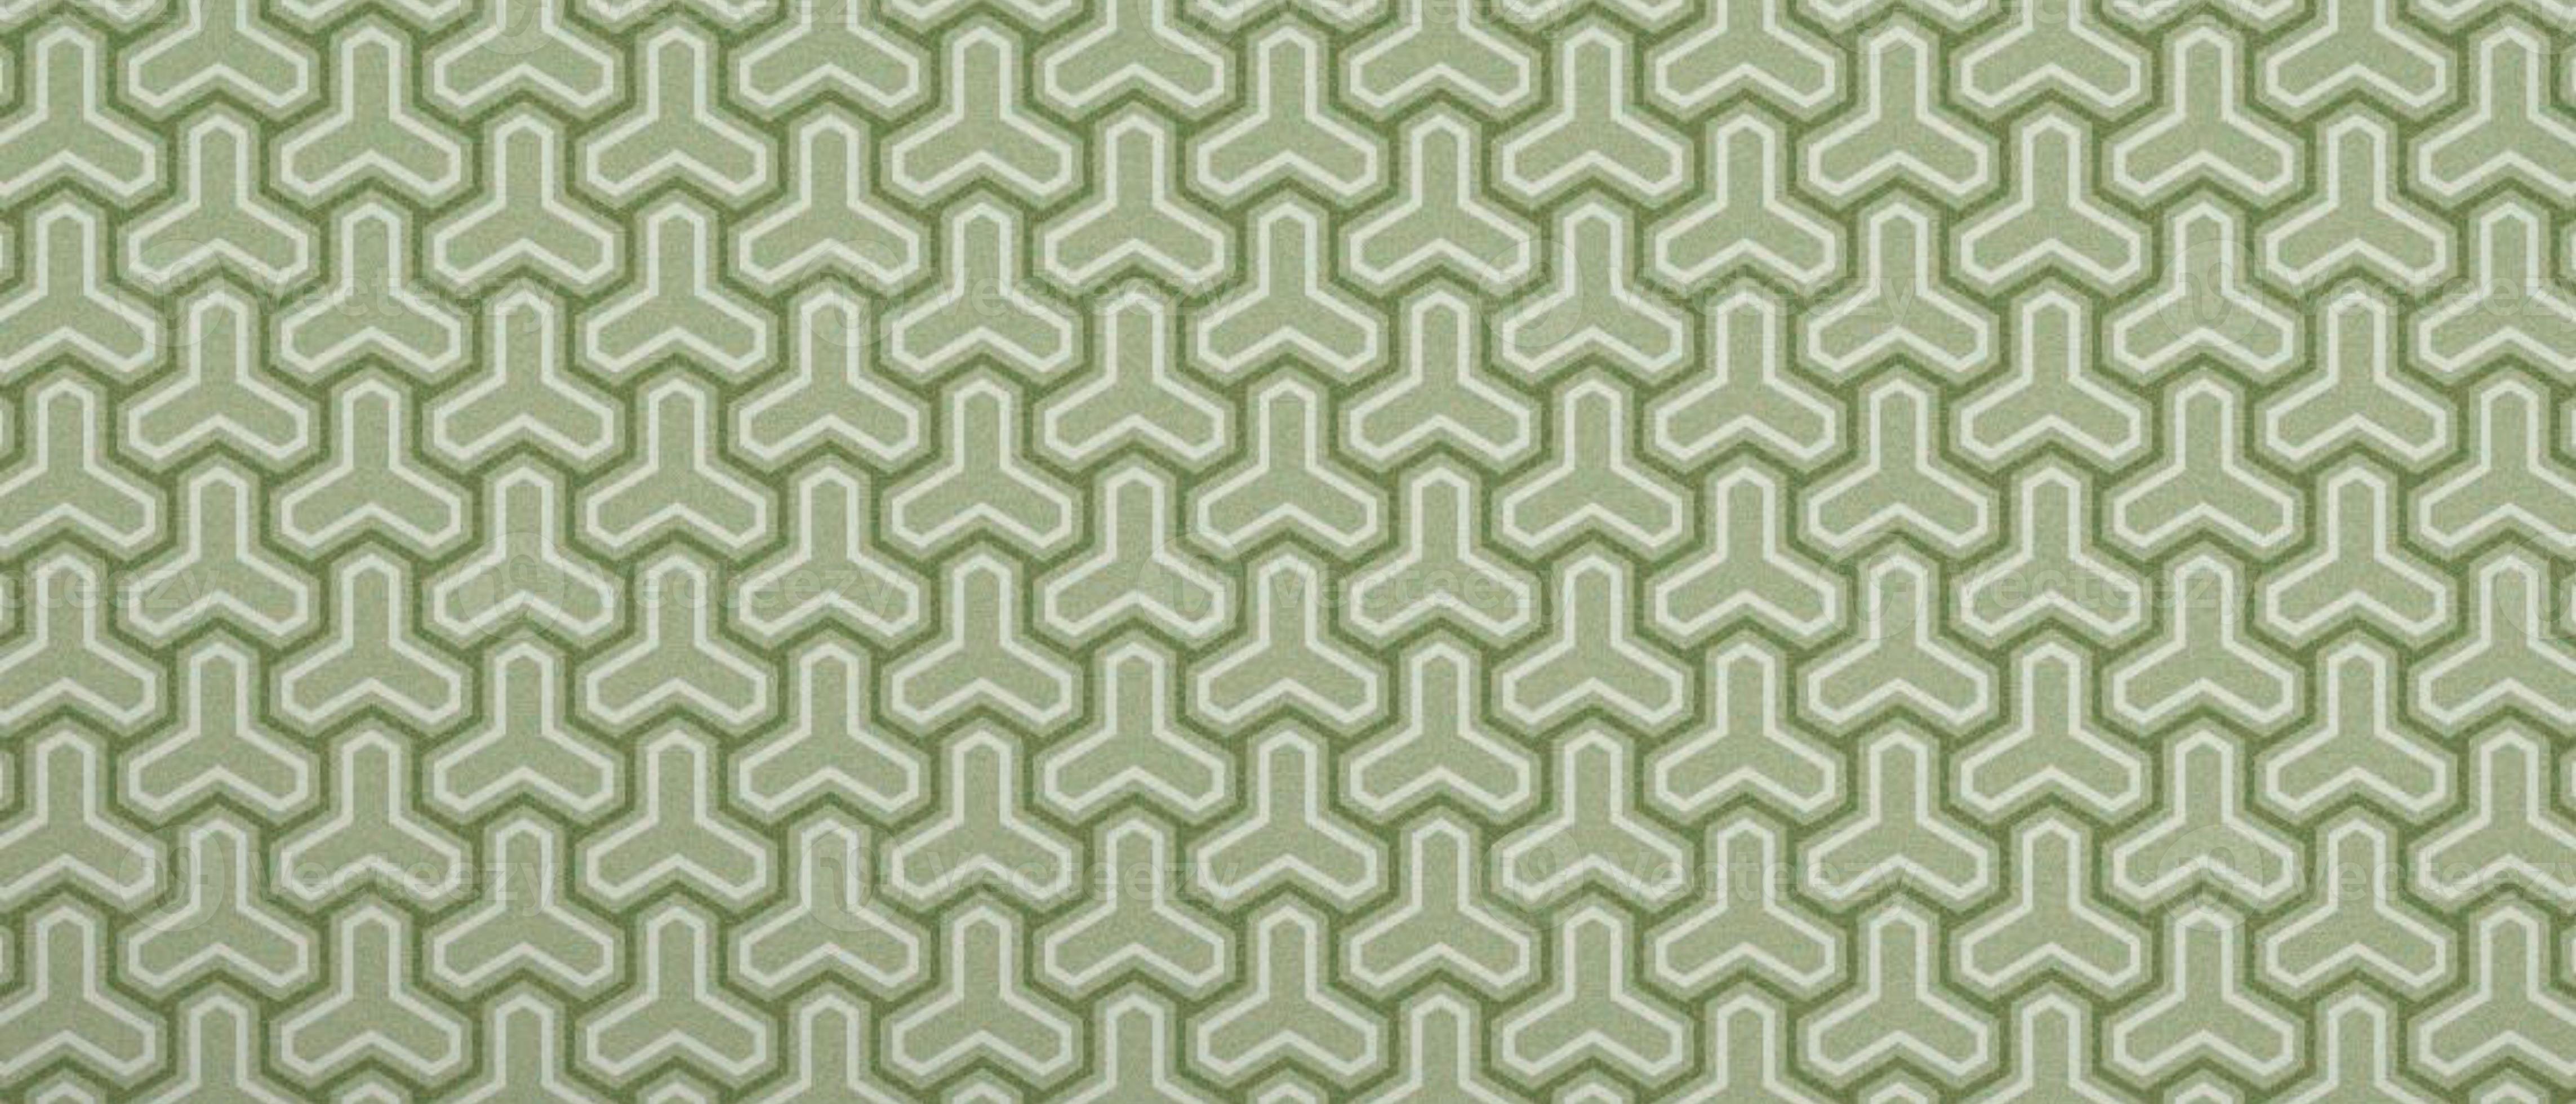 A green and white patterned fabric with geometric shapes - Aqua